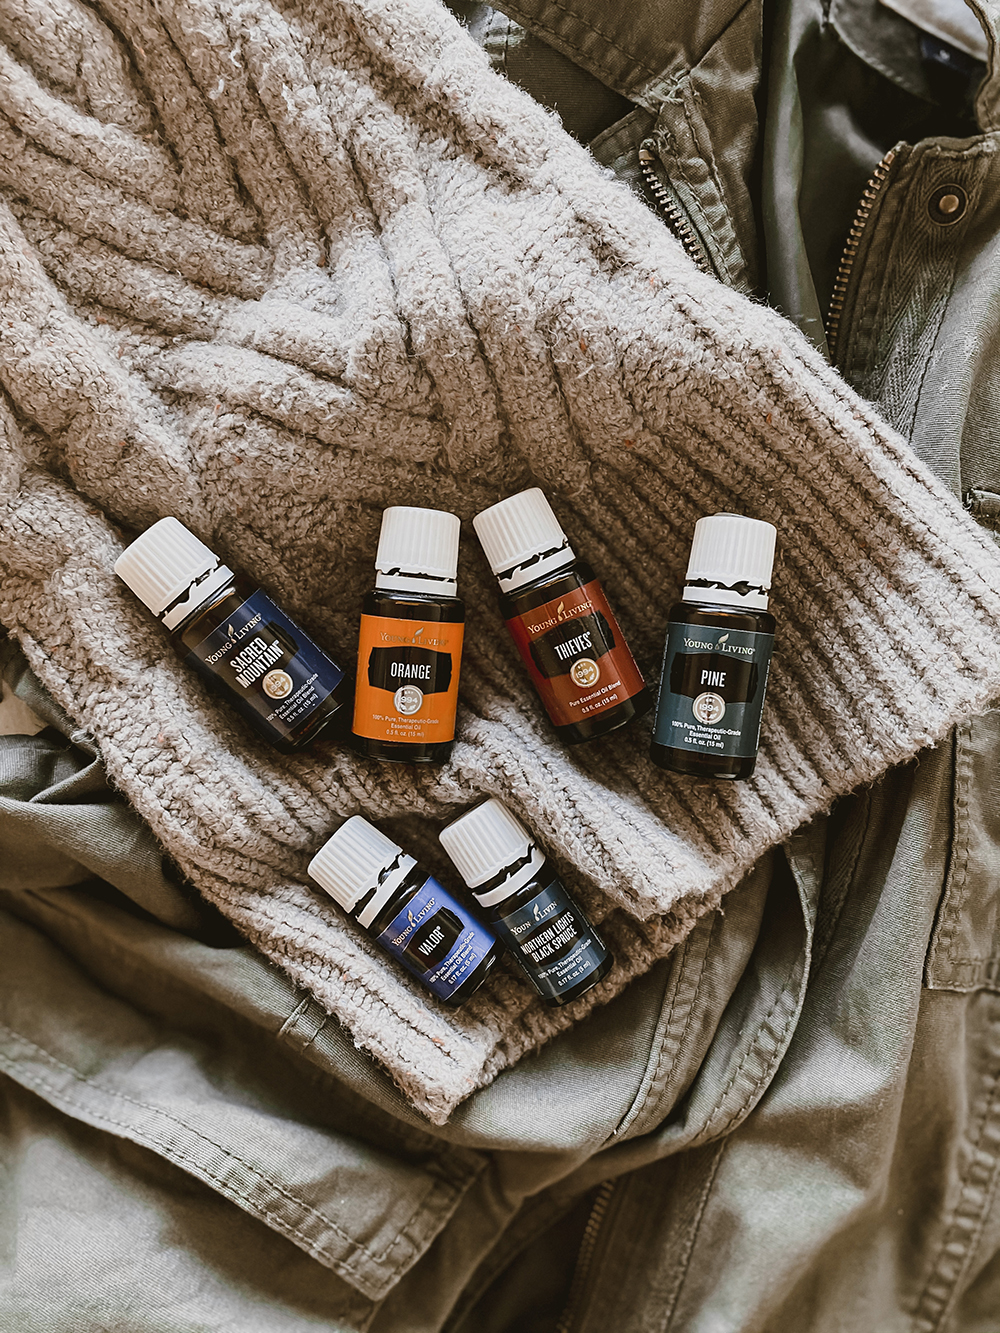 Combatting winter blues and how I am using essential oils to help. Read more at KaraLayne.com